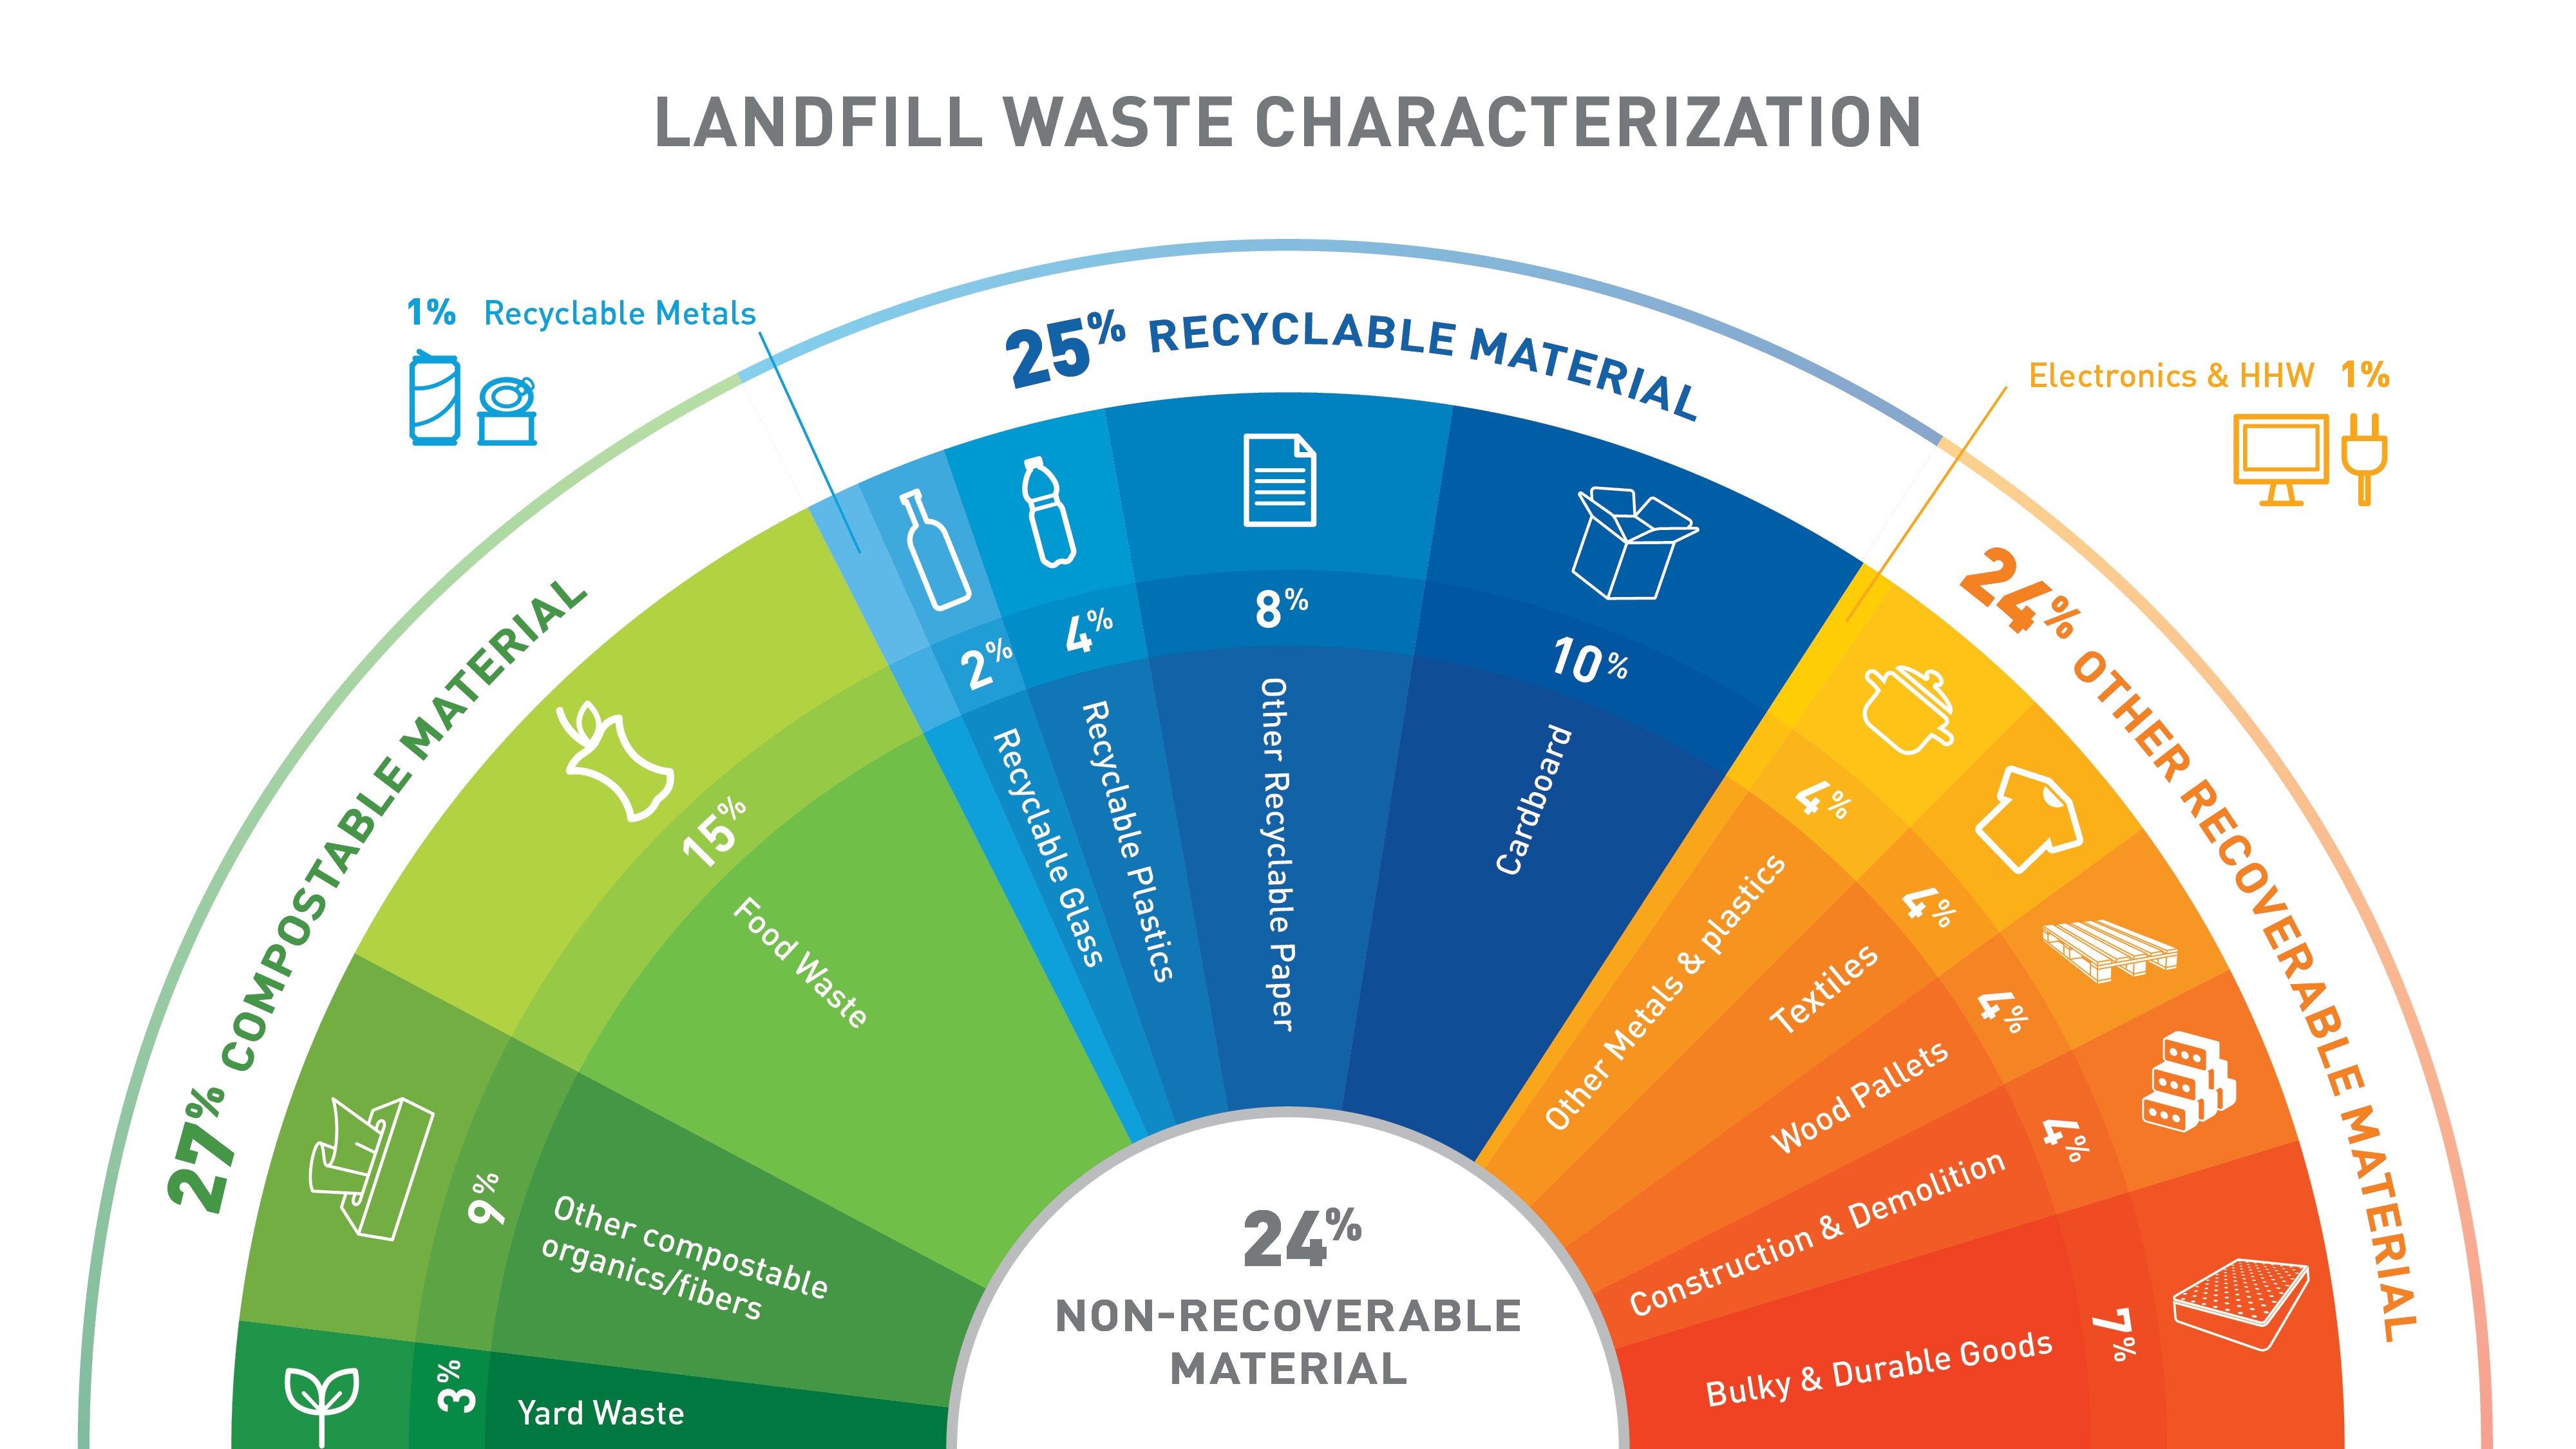 landfill waste charaectrization graphic of compostable,recyclable, and recoverable material